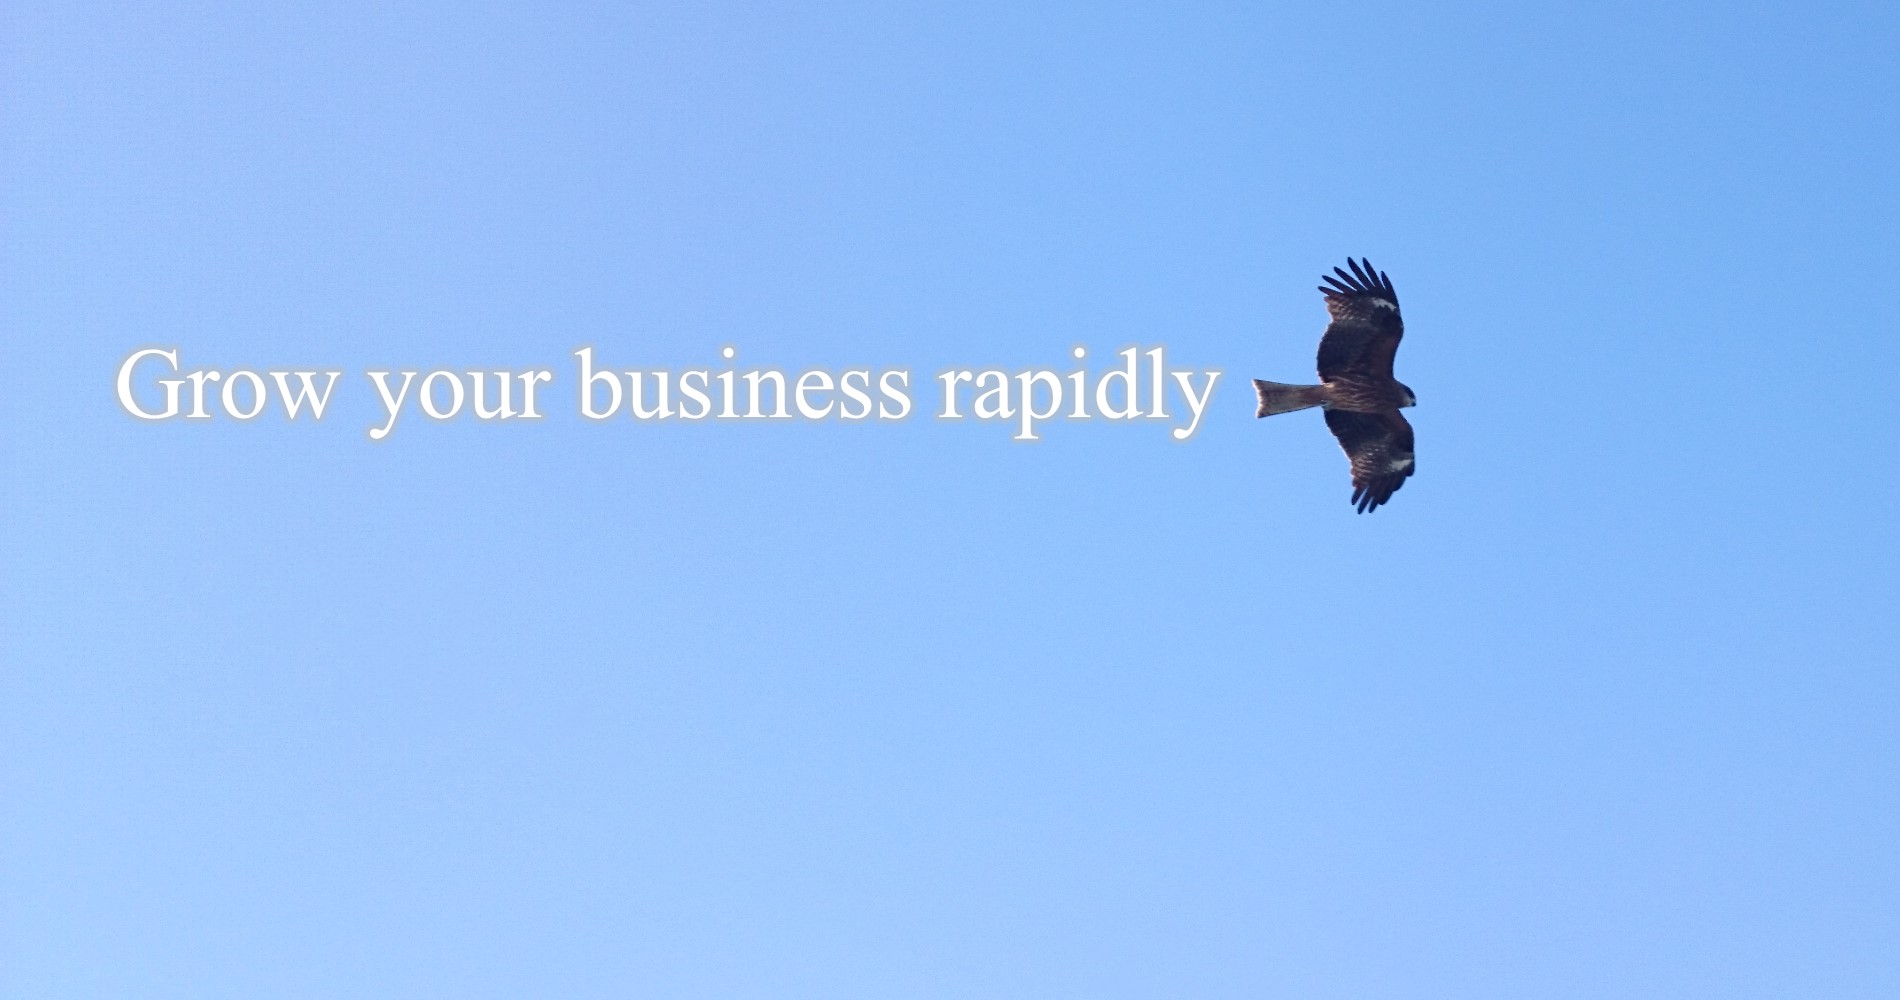 Grow your business rapidly. Photo: Eagle